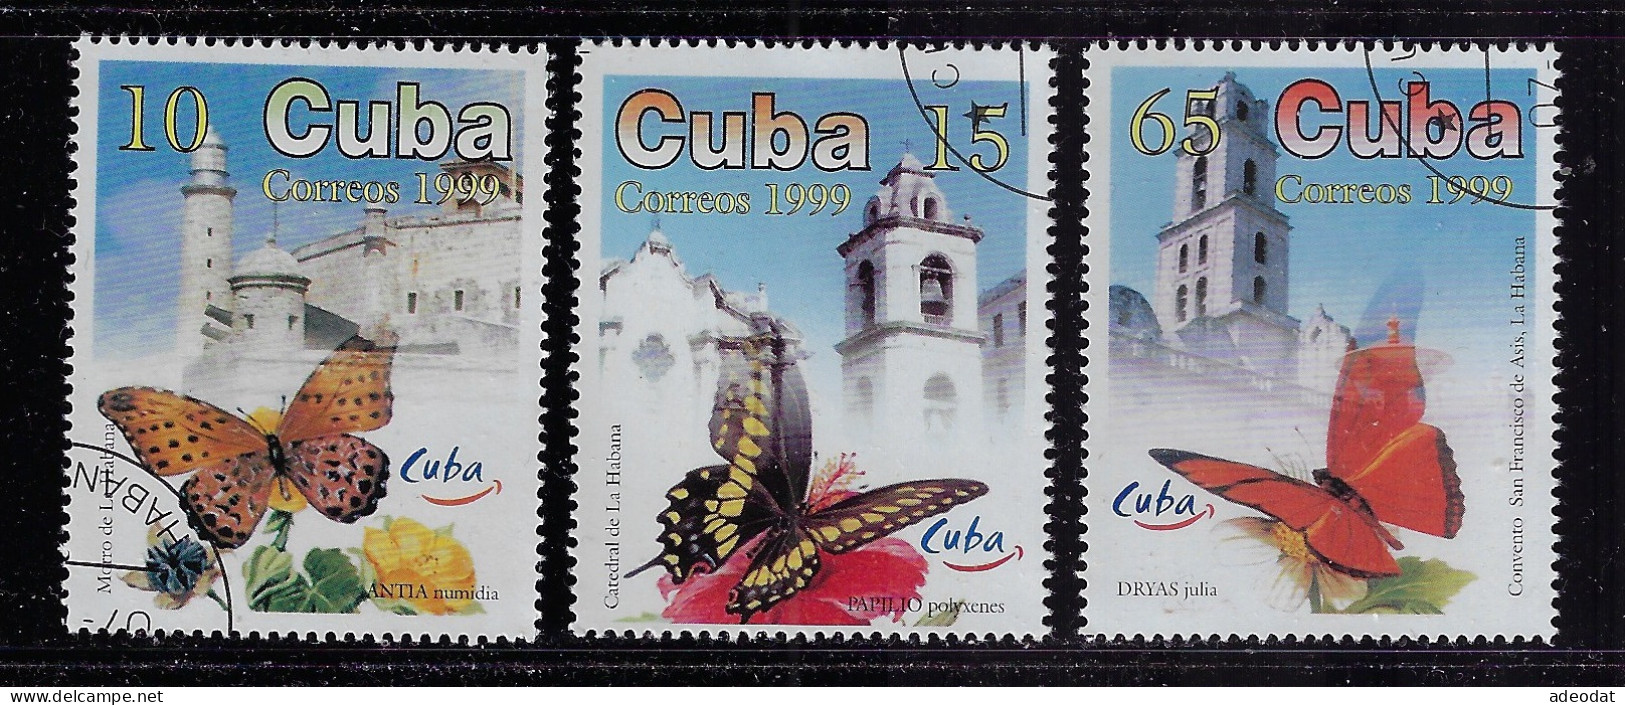 CUBA 1999 SCOTT 4031-4033 CANCELLED - Used Stamps